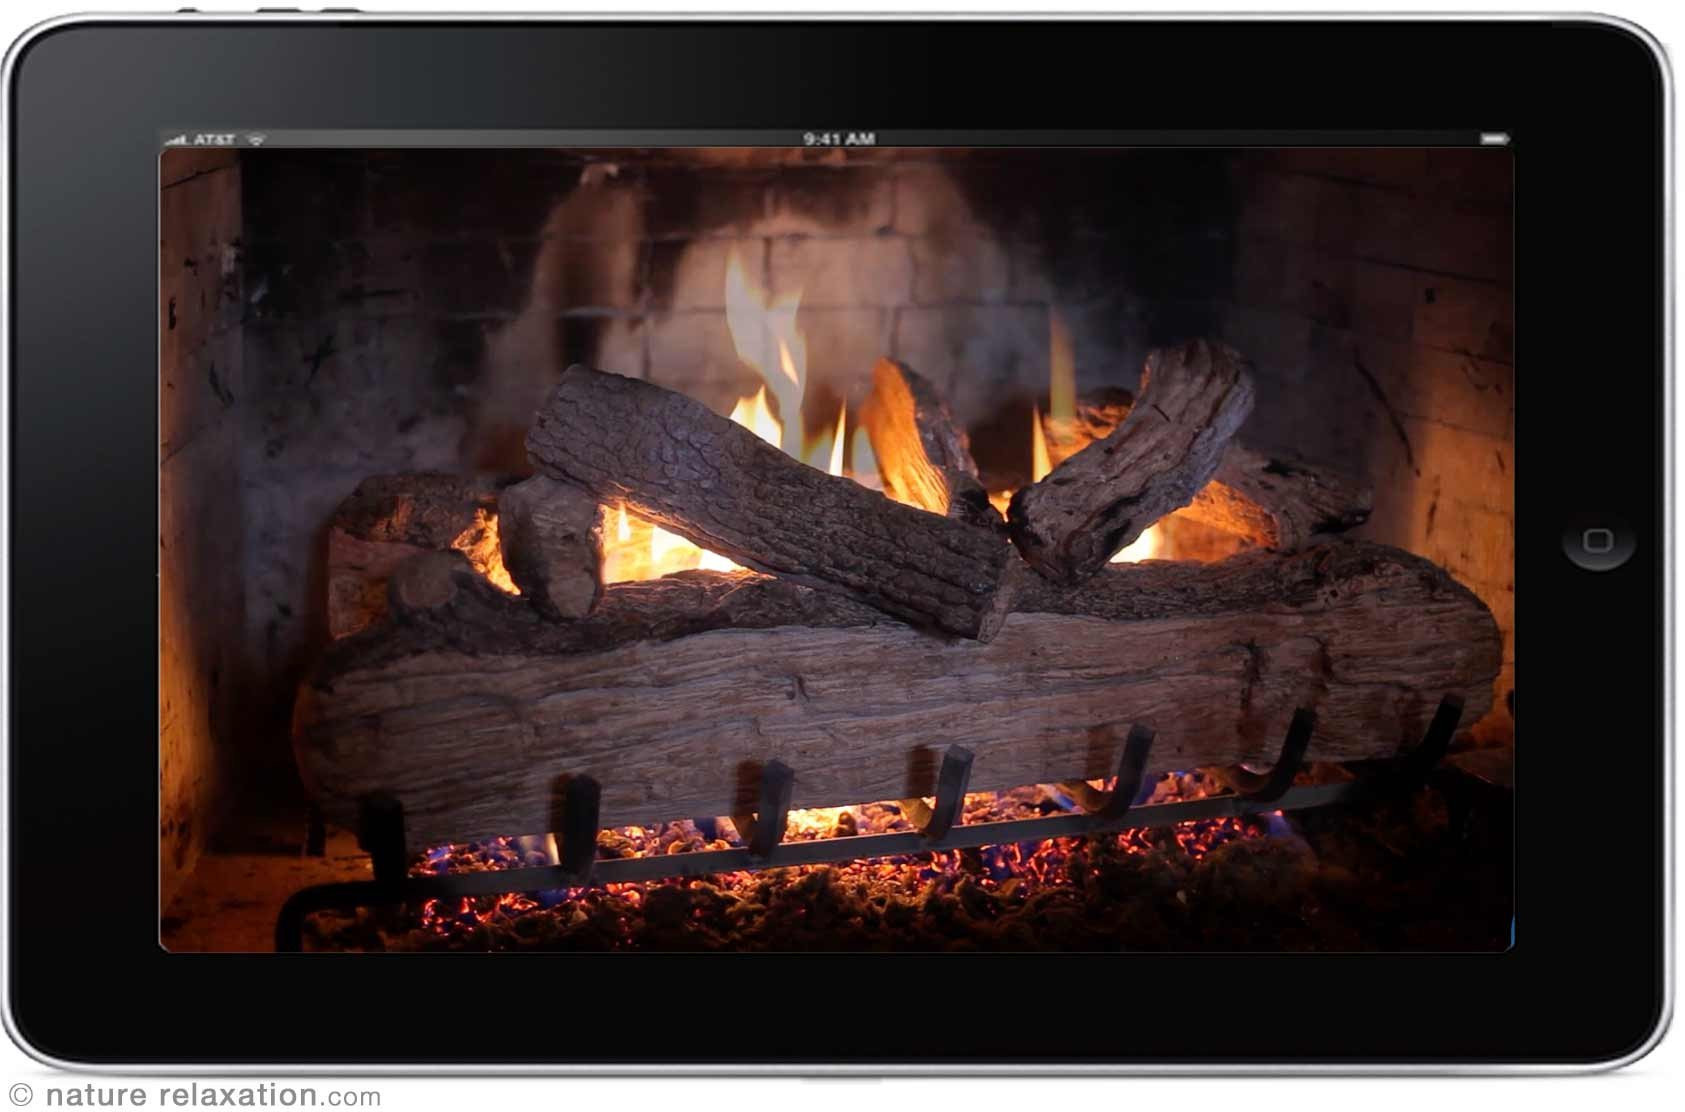 Crackling Fireplace With Christmas Music
 "Crackling Fireplace" Looping Nature Relaxation Video